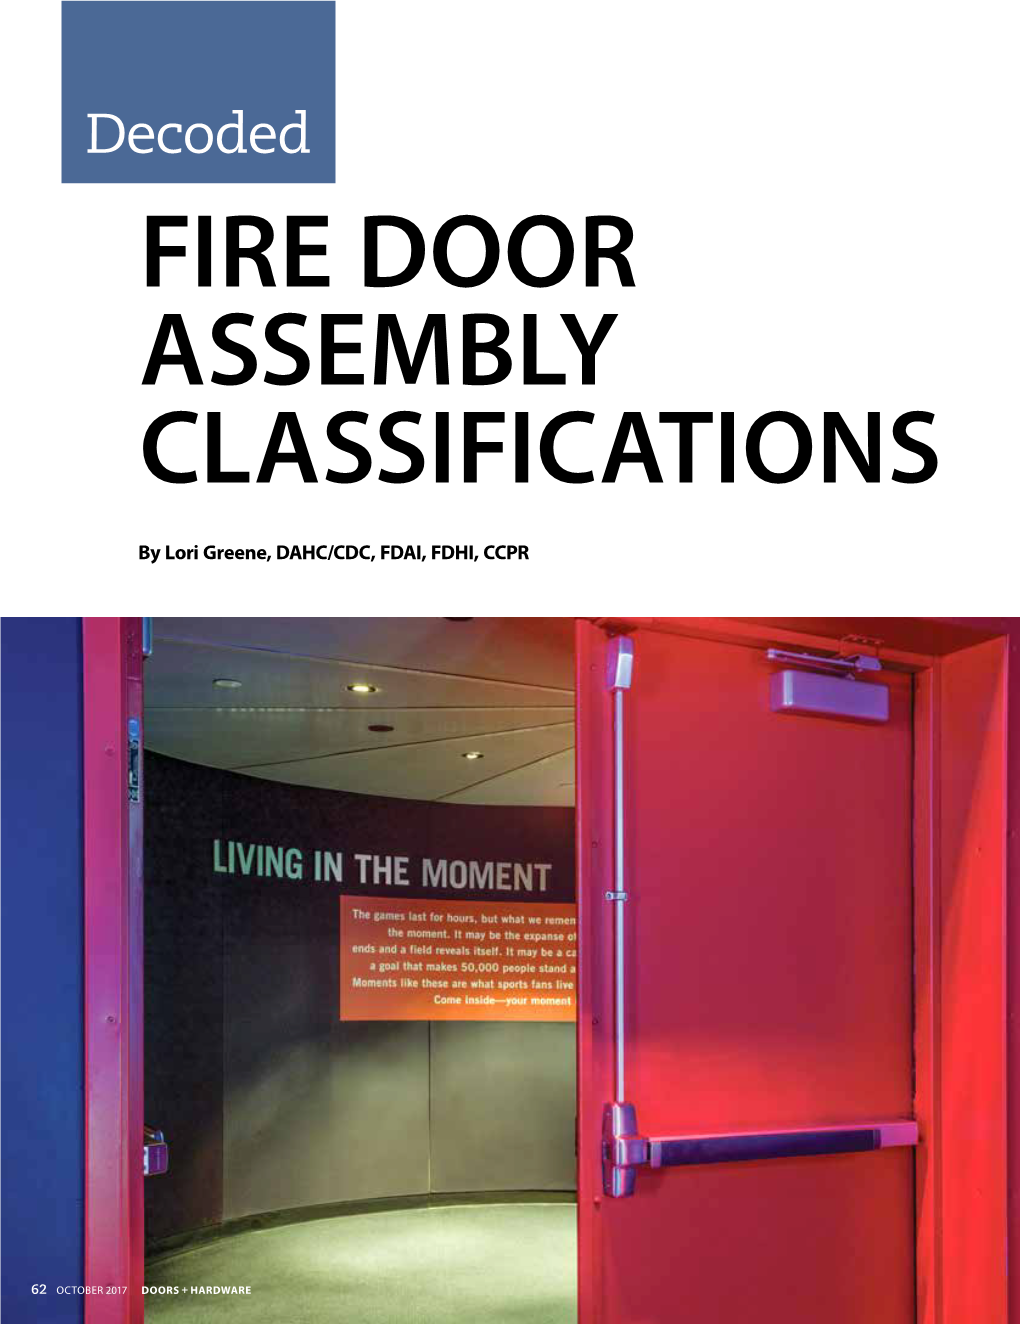 Decoded FIRE DOOR ASSEMBLY CLASSIFICATIONS